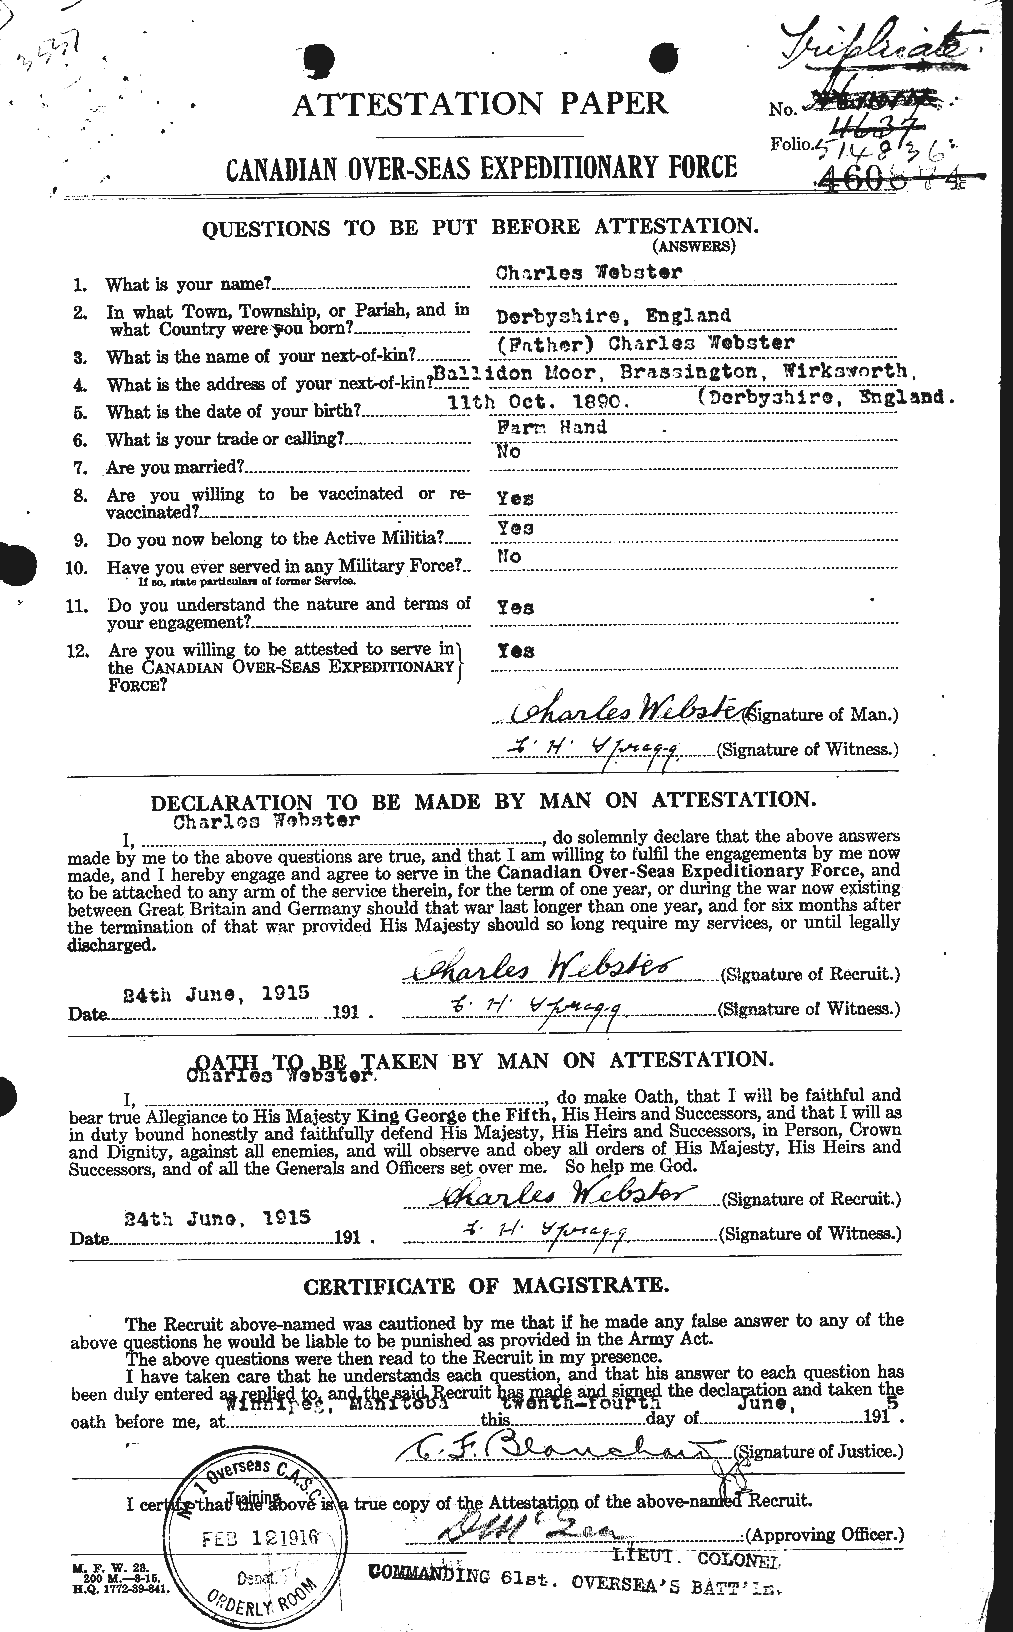 Personnel Records of the First World War - CEF 670289a